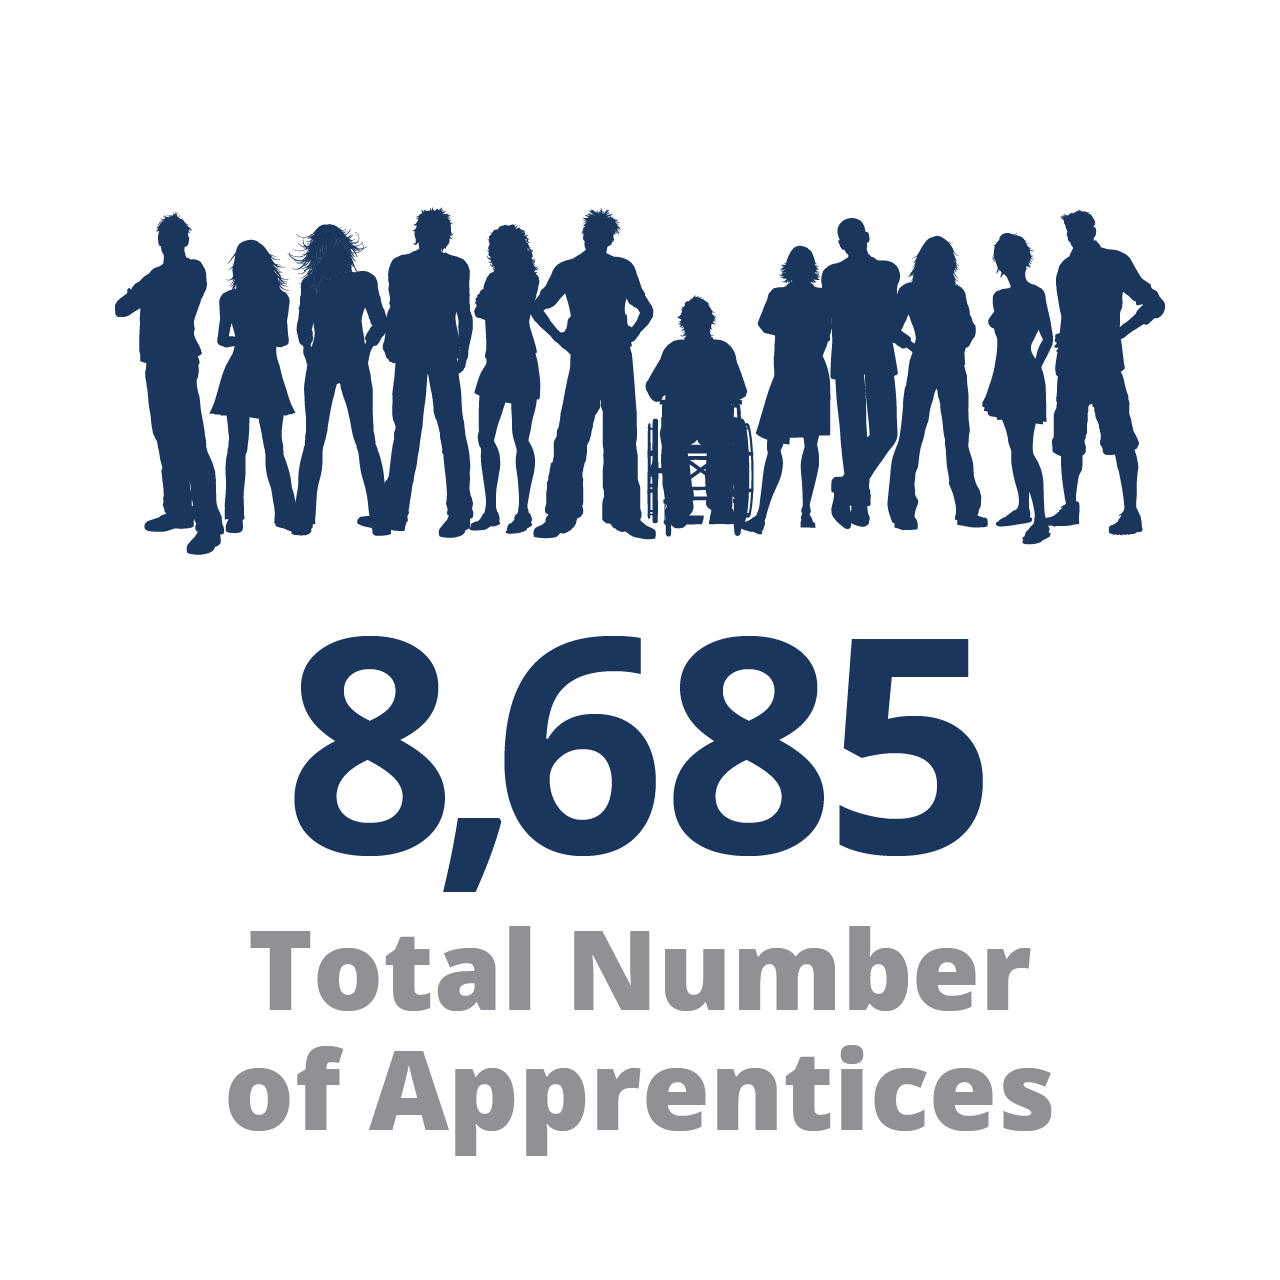 8,747 Total Number of Apprentices